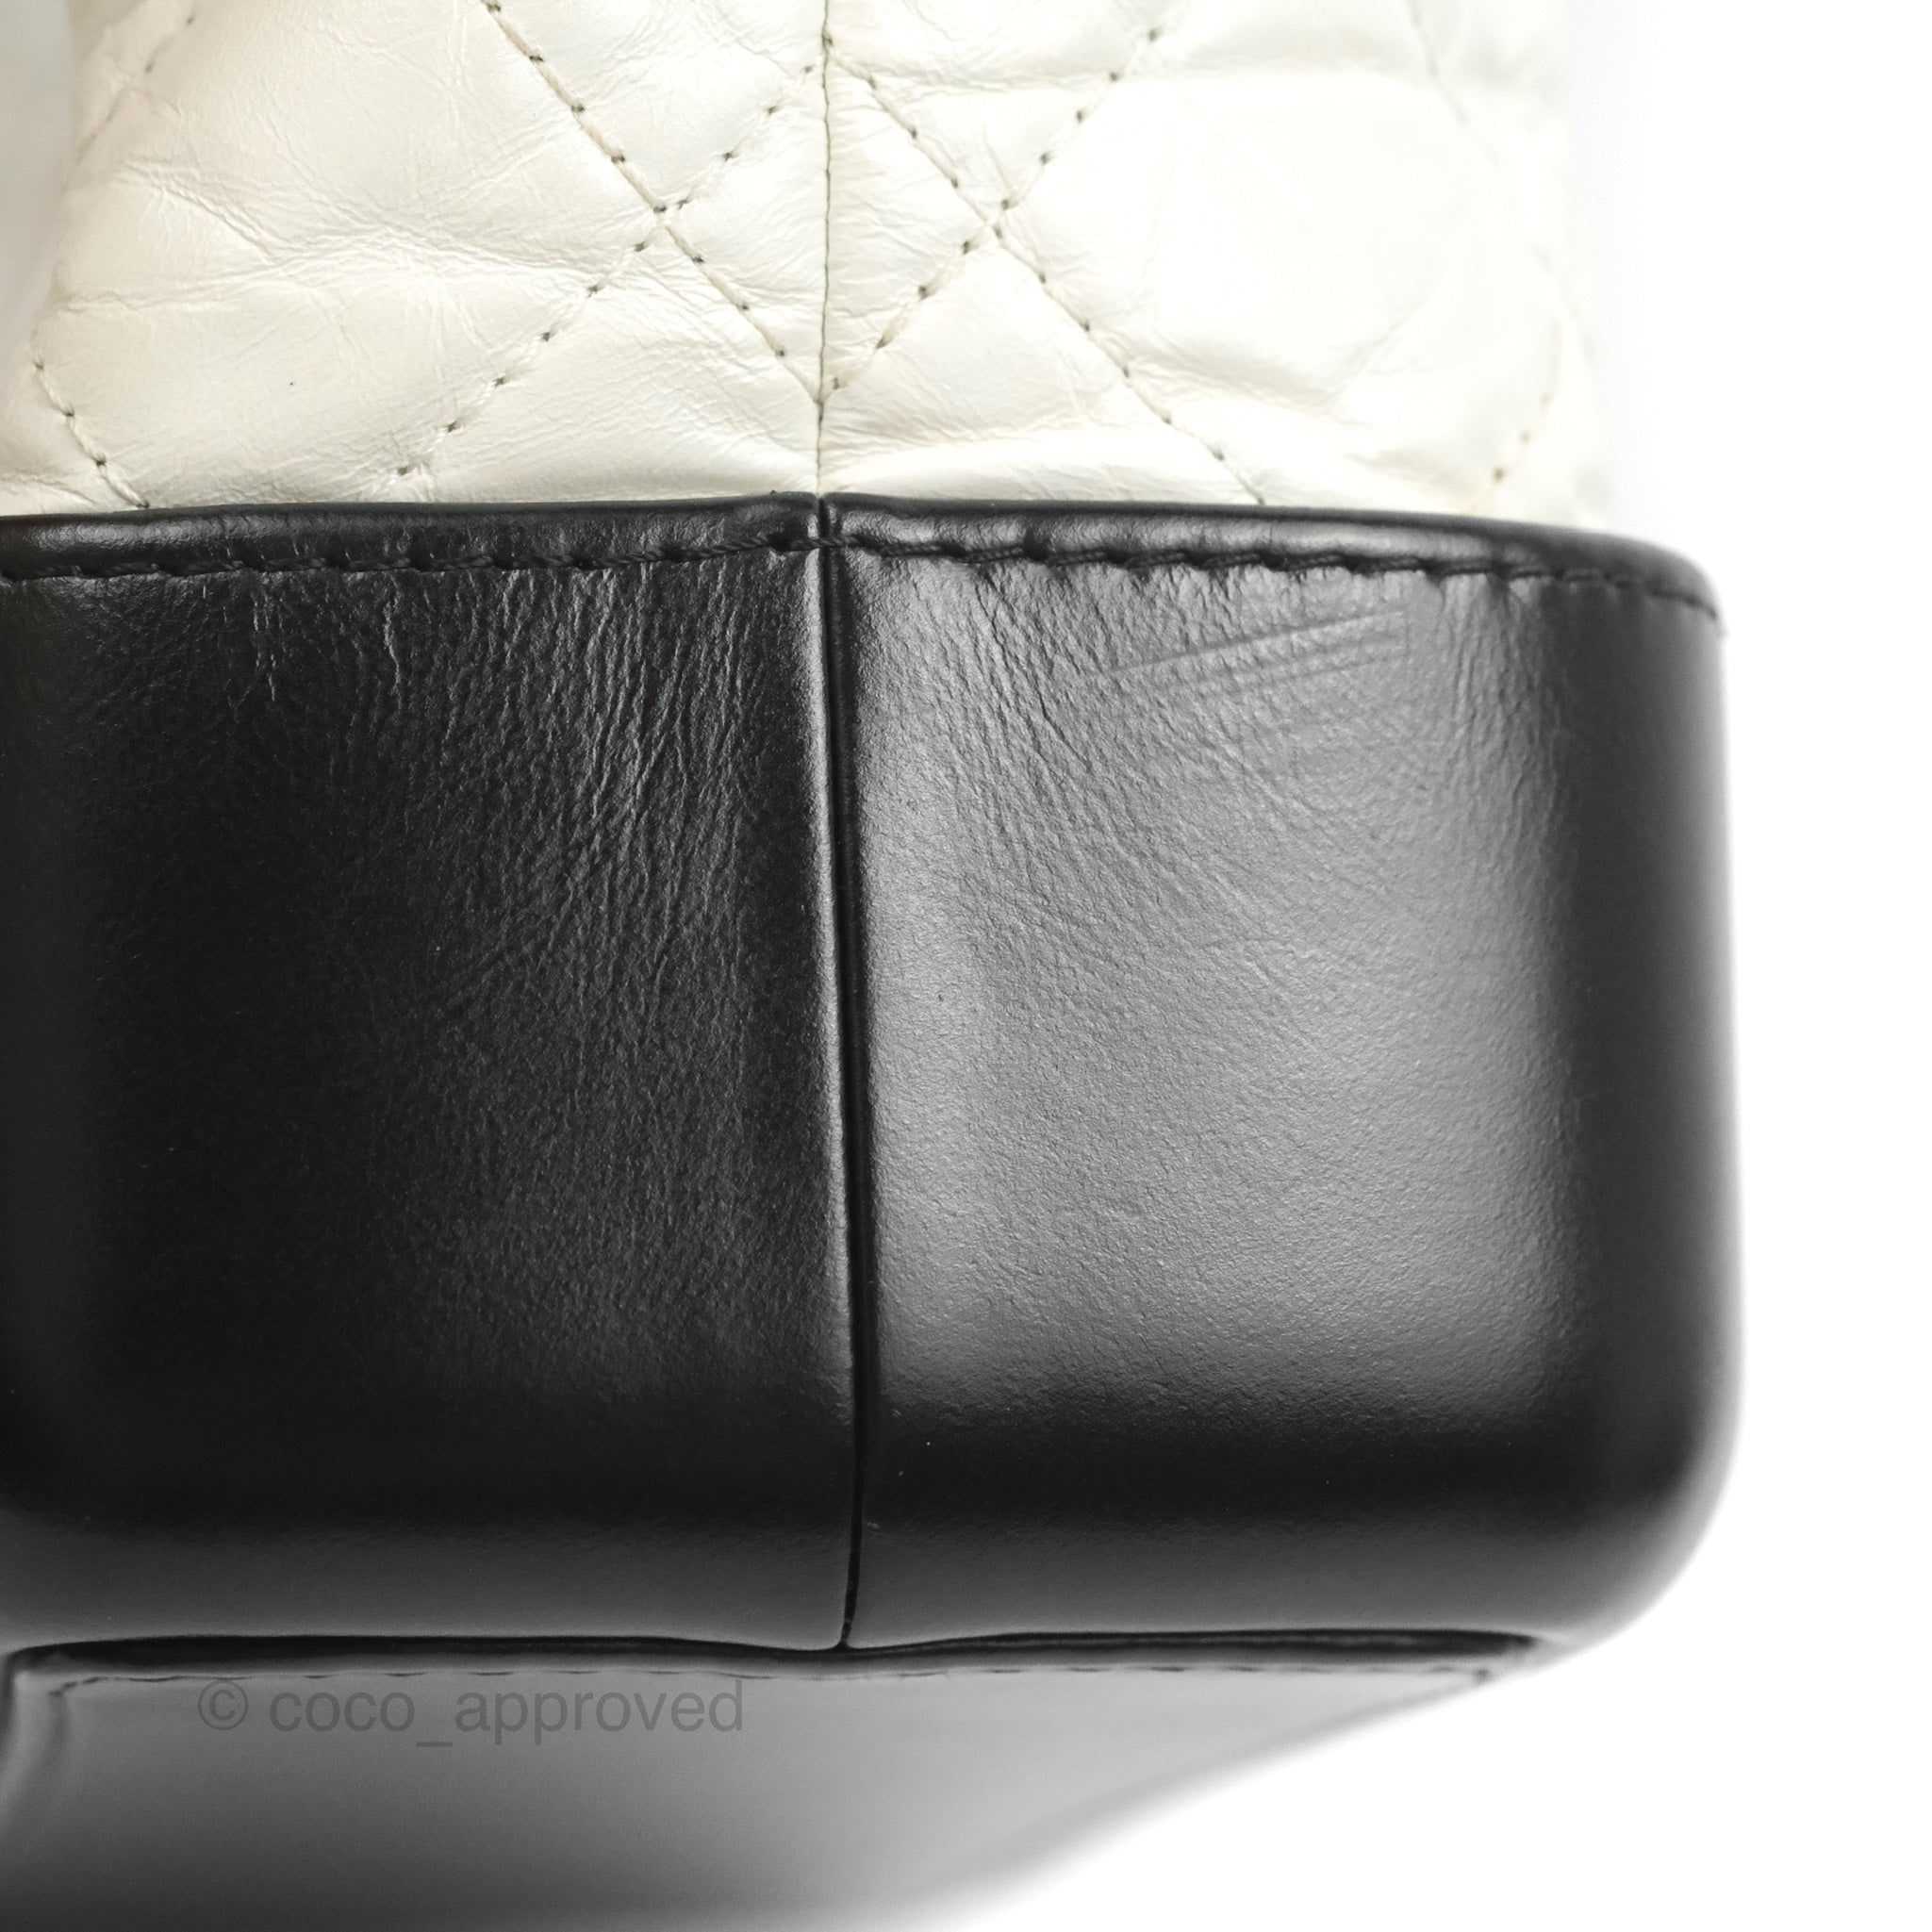 CHANEL Aged Calfskin Quilted Small Gabrielle Backpack Black White 1301663